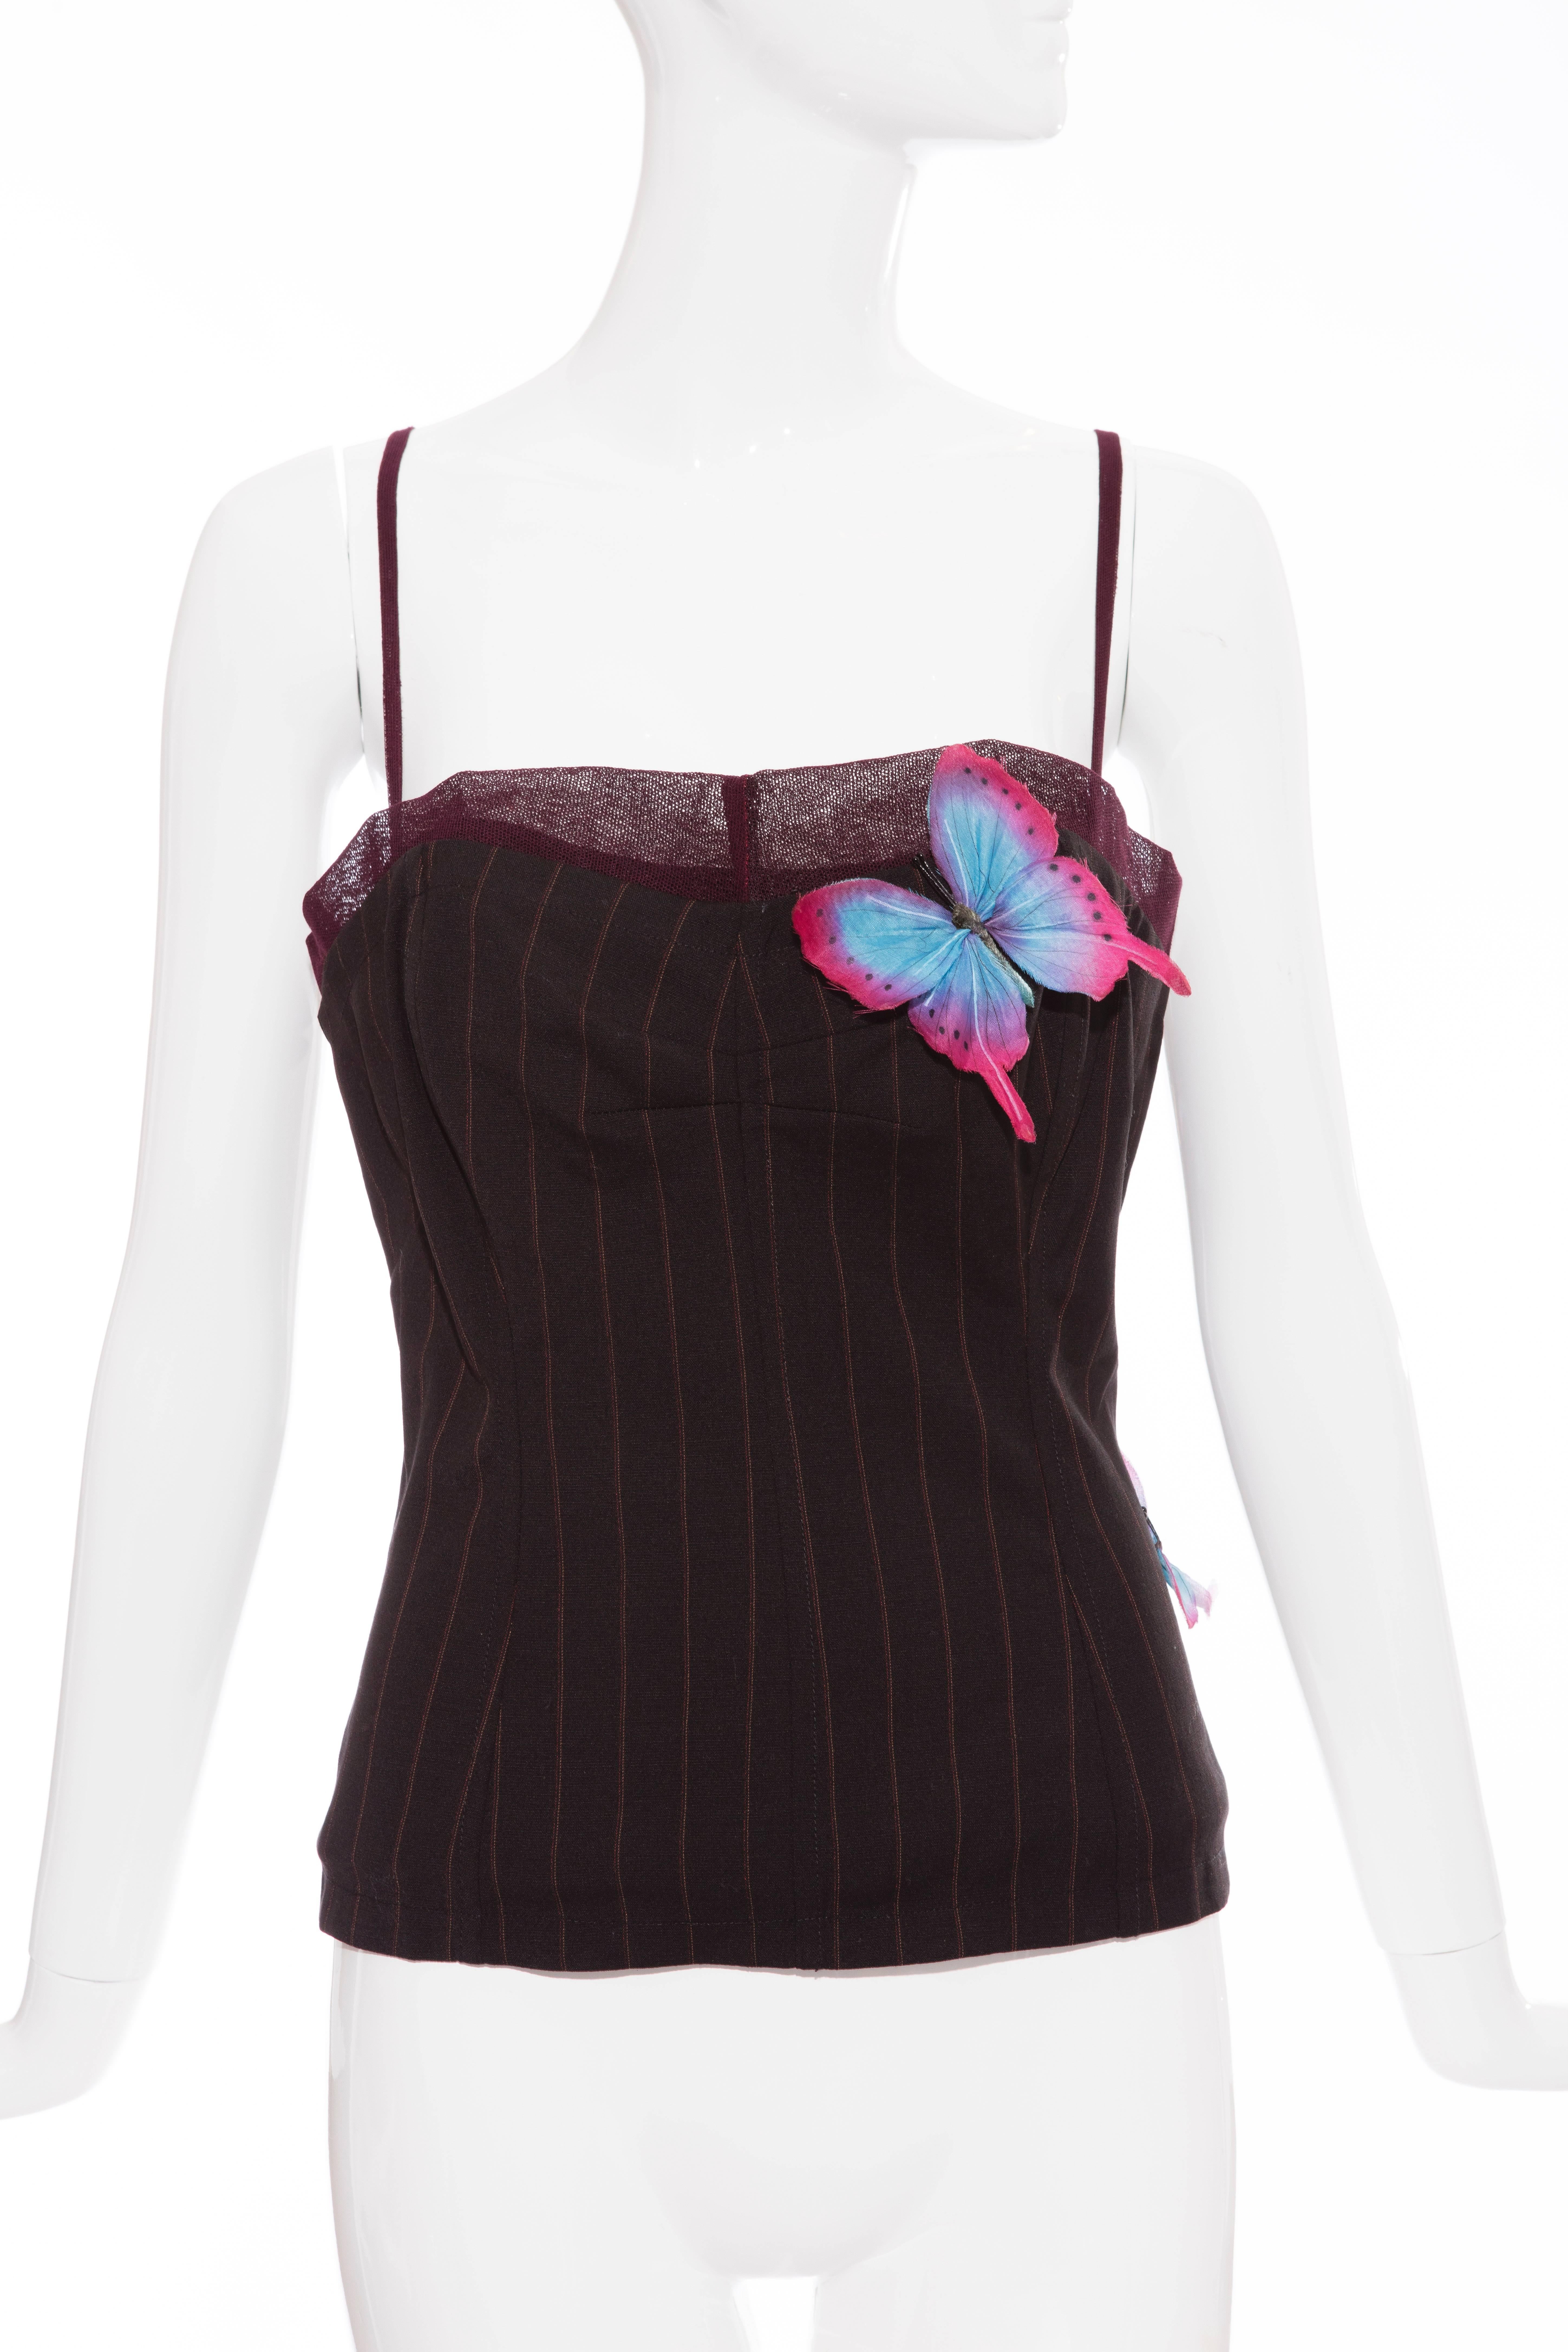 Dolce & Gabbana, Spring=Summer 1998, bustier with sweetheart neckline, mesh at trim, pinstripe pattern, butterfly embellishments throughout and multiple hook and eye closures at center back.

IT. 44
US. 8

Bust 36”, Waist 30”, Length